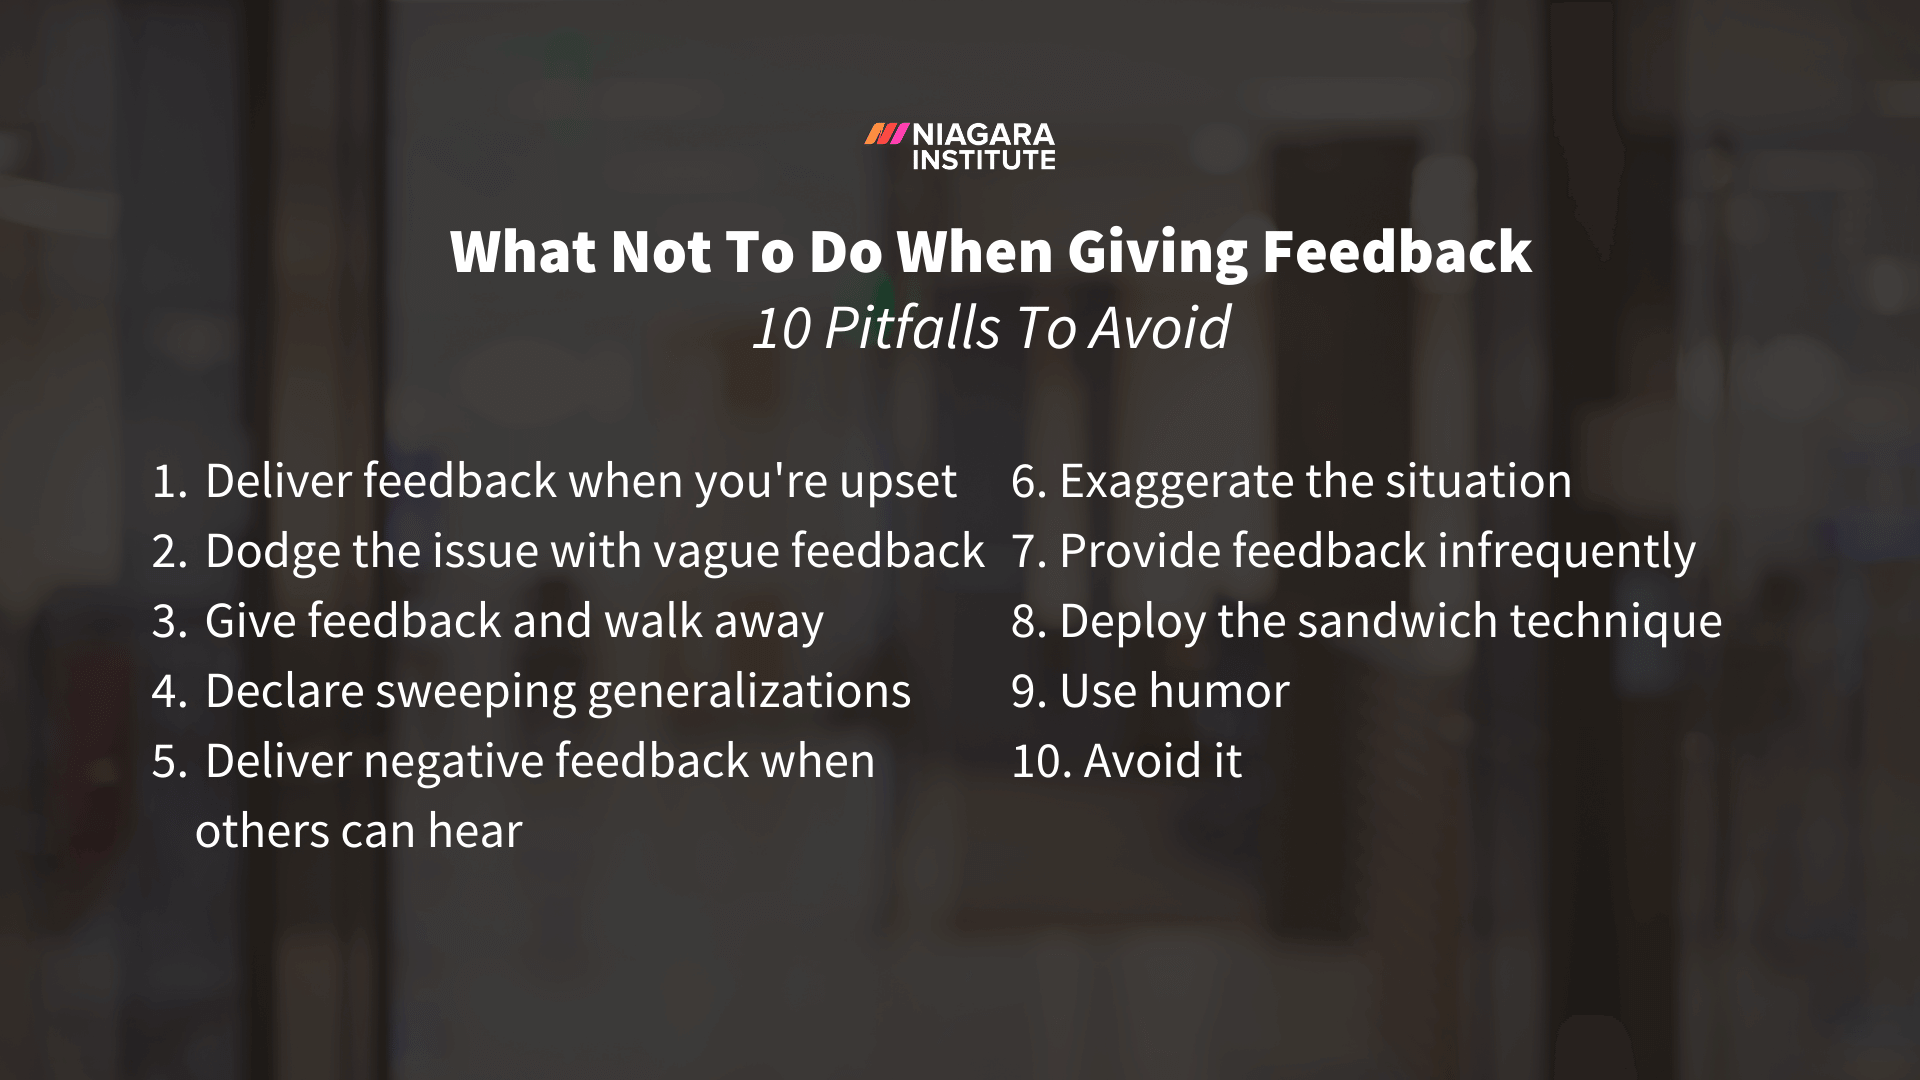 What Not To Do When Giving Feedback - 10 Pitfalls to Avoid (2) (1)